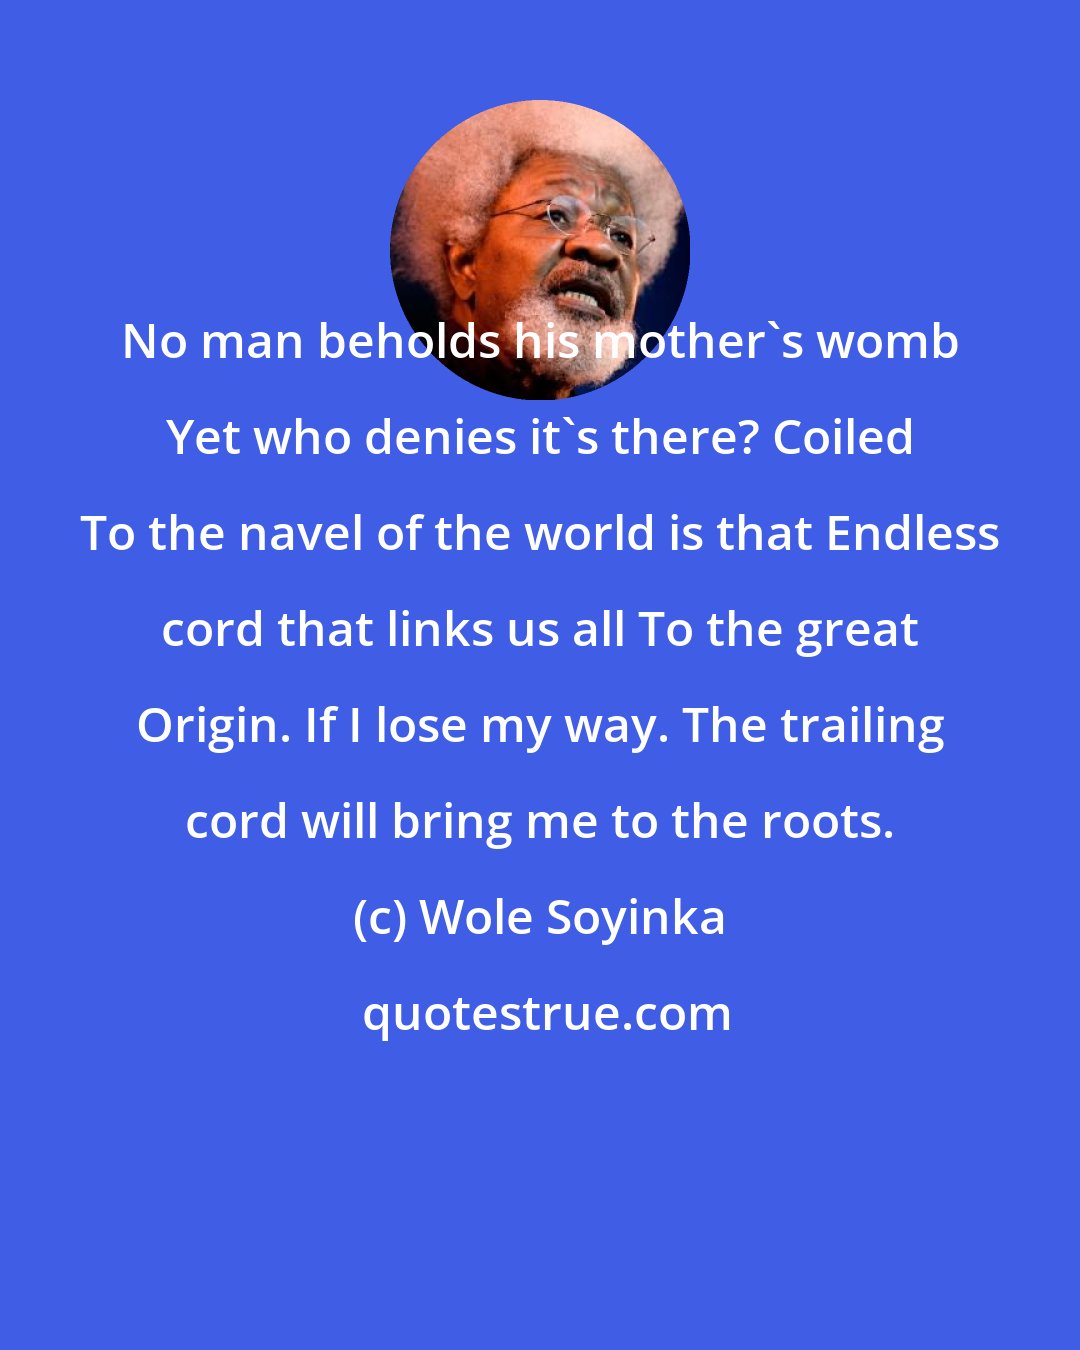 Wole Soyinka: No man beholds his mother's womb Yet who denies it's there? Coiled To the navel of the world is that Endless cord that links us all To the great Origin. If I lose my way. The trailing cord will bring me to the roots.